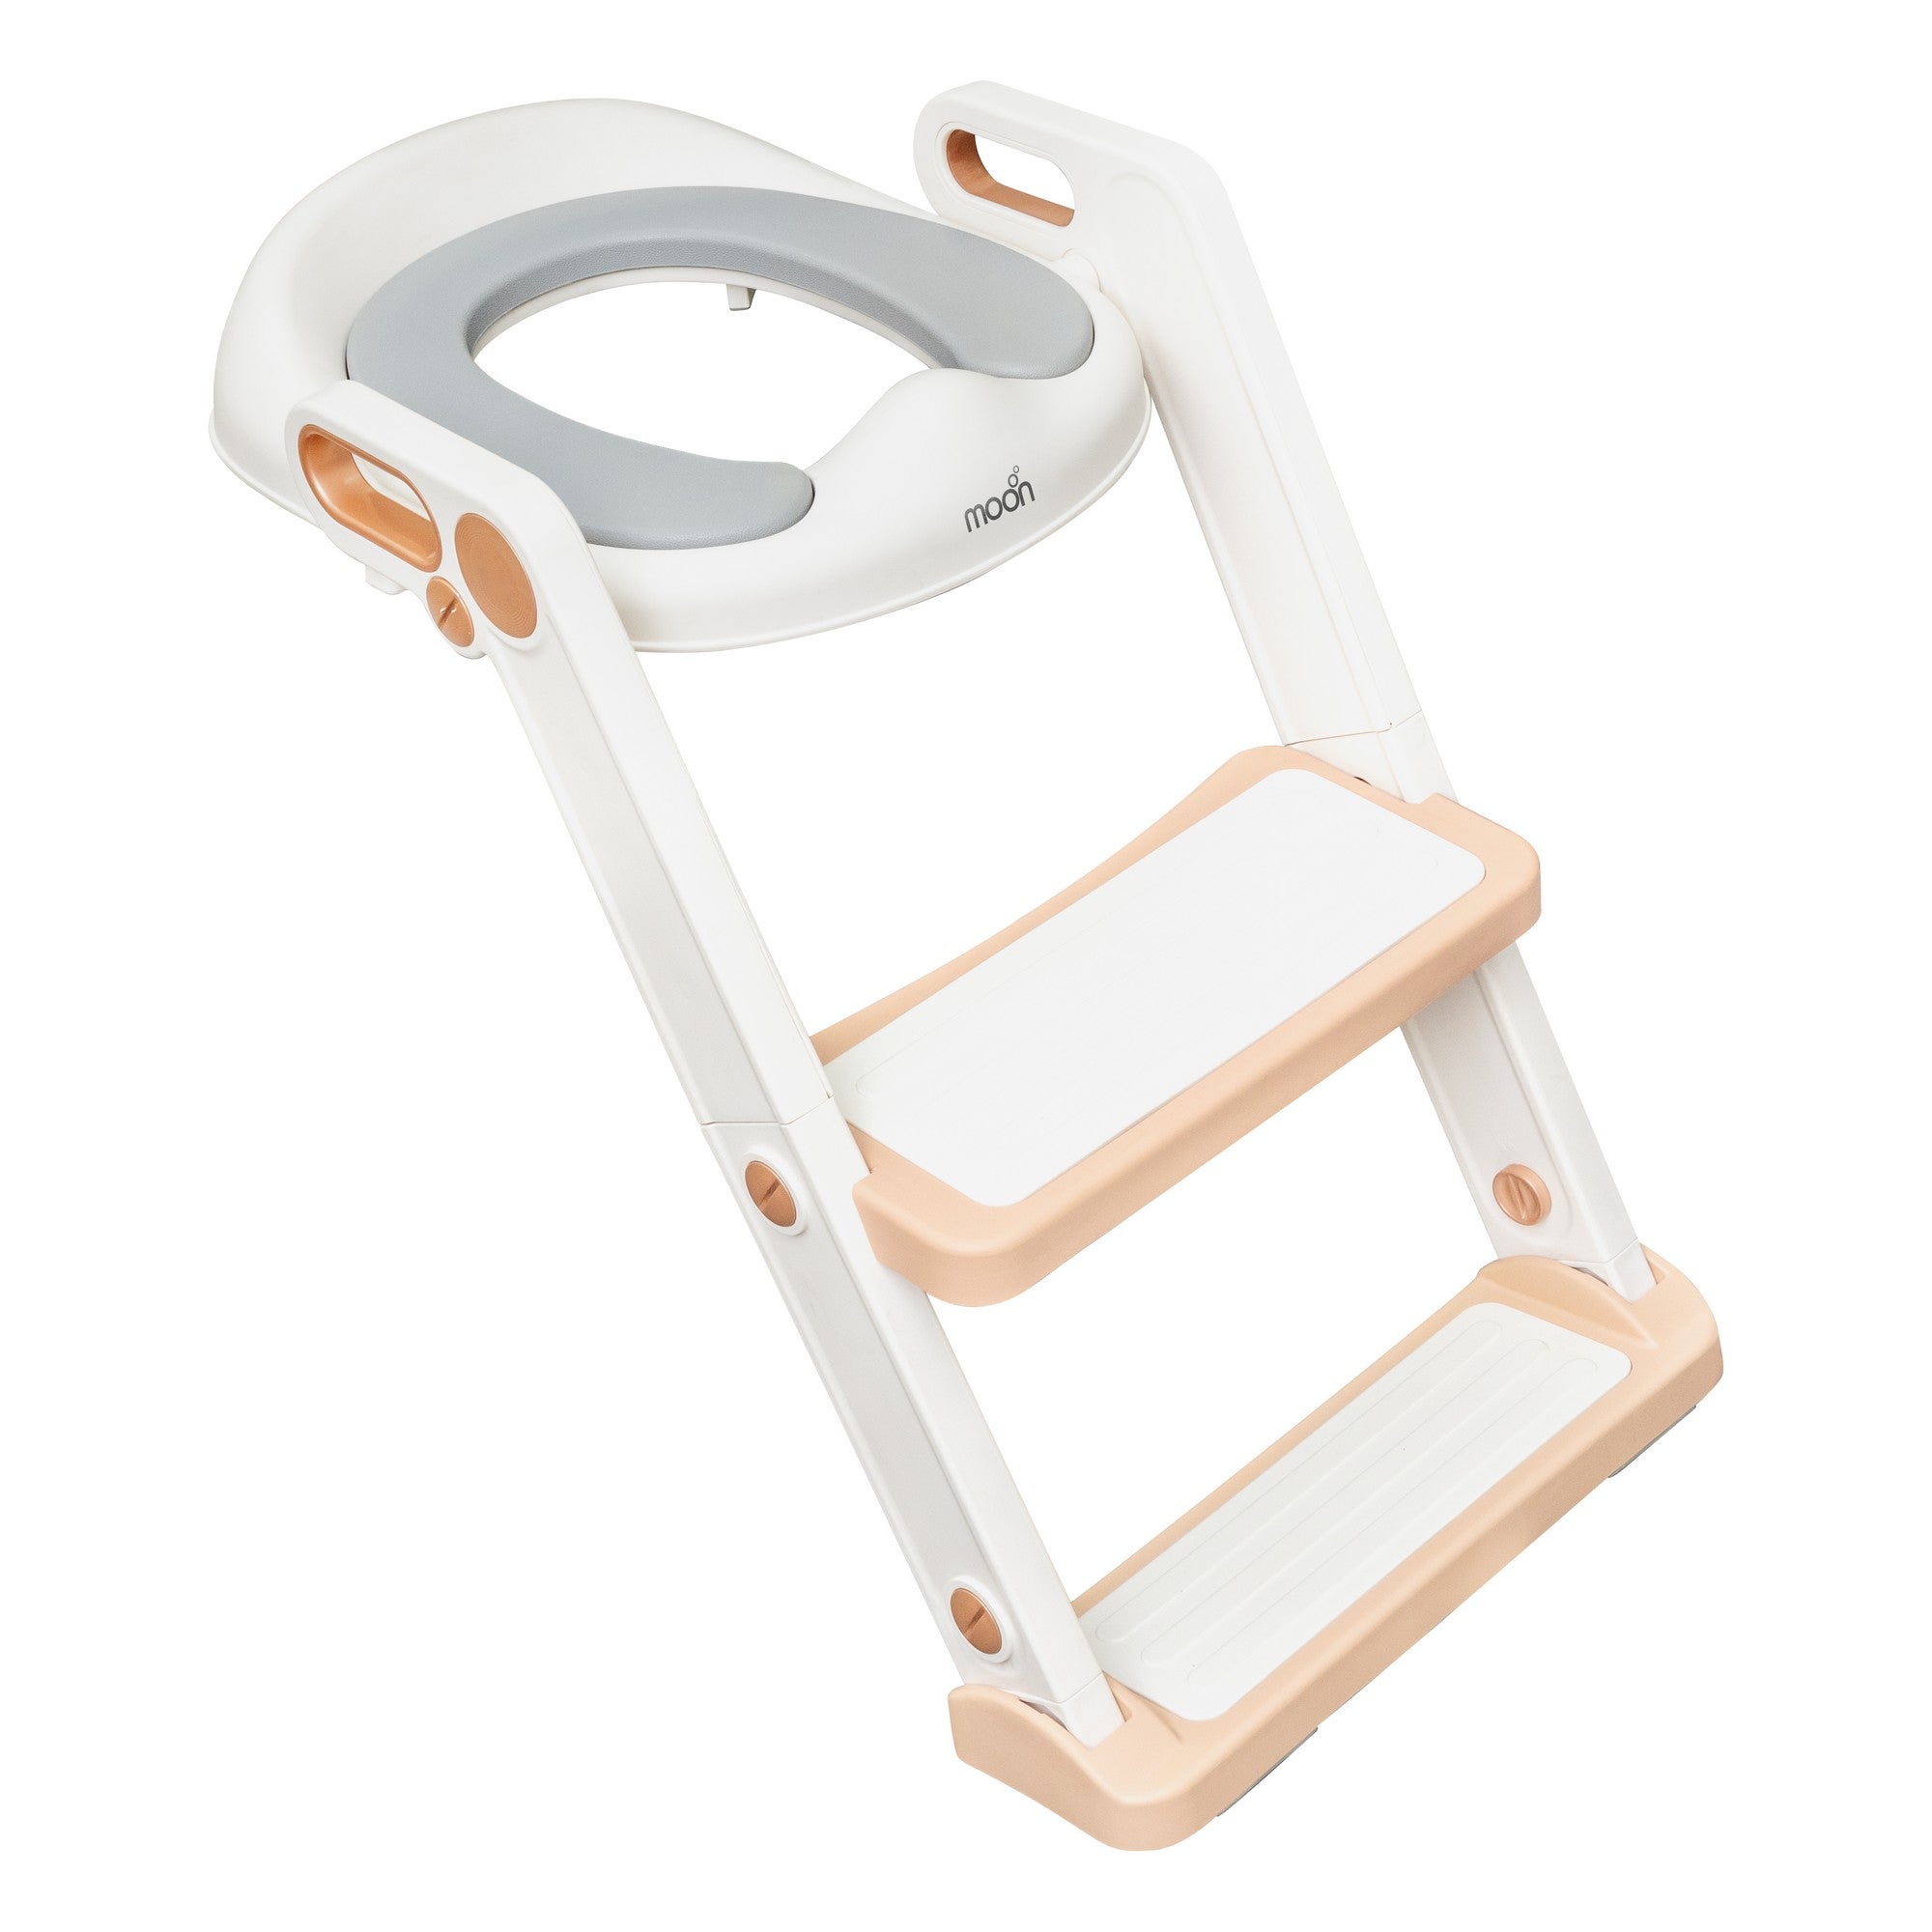 Moon Step Stool Potty Trainer Seat Potty Training White and gold 18 to 36 Months